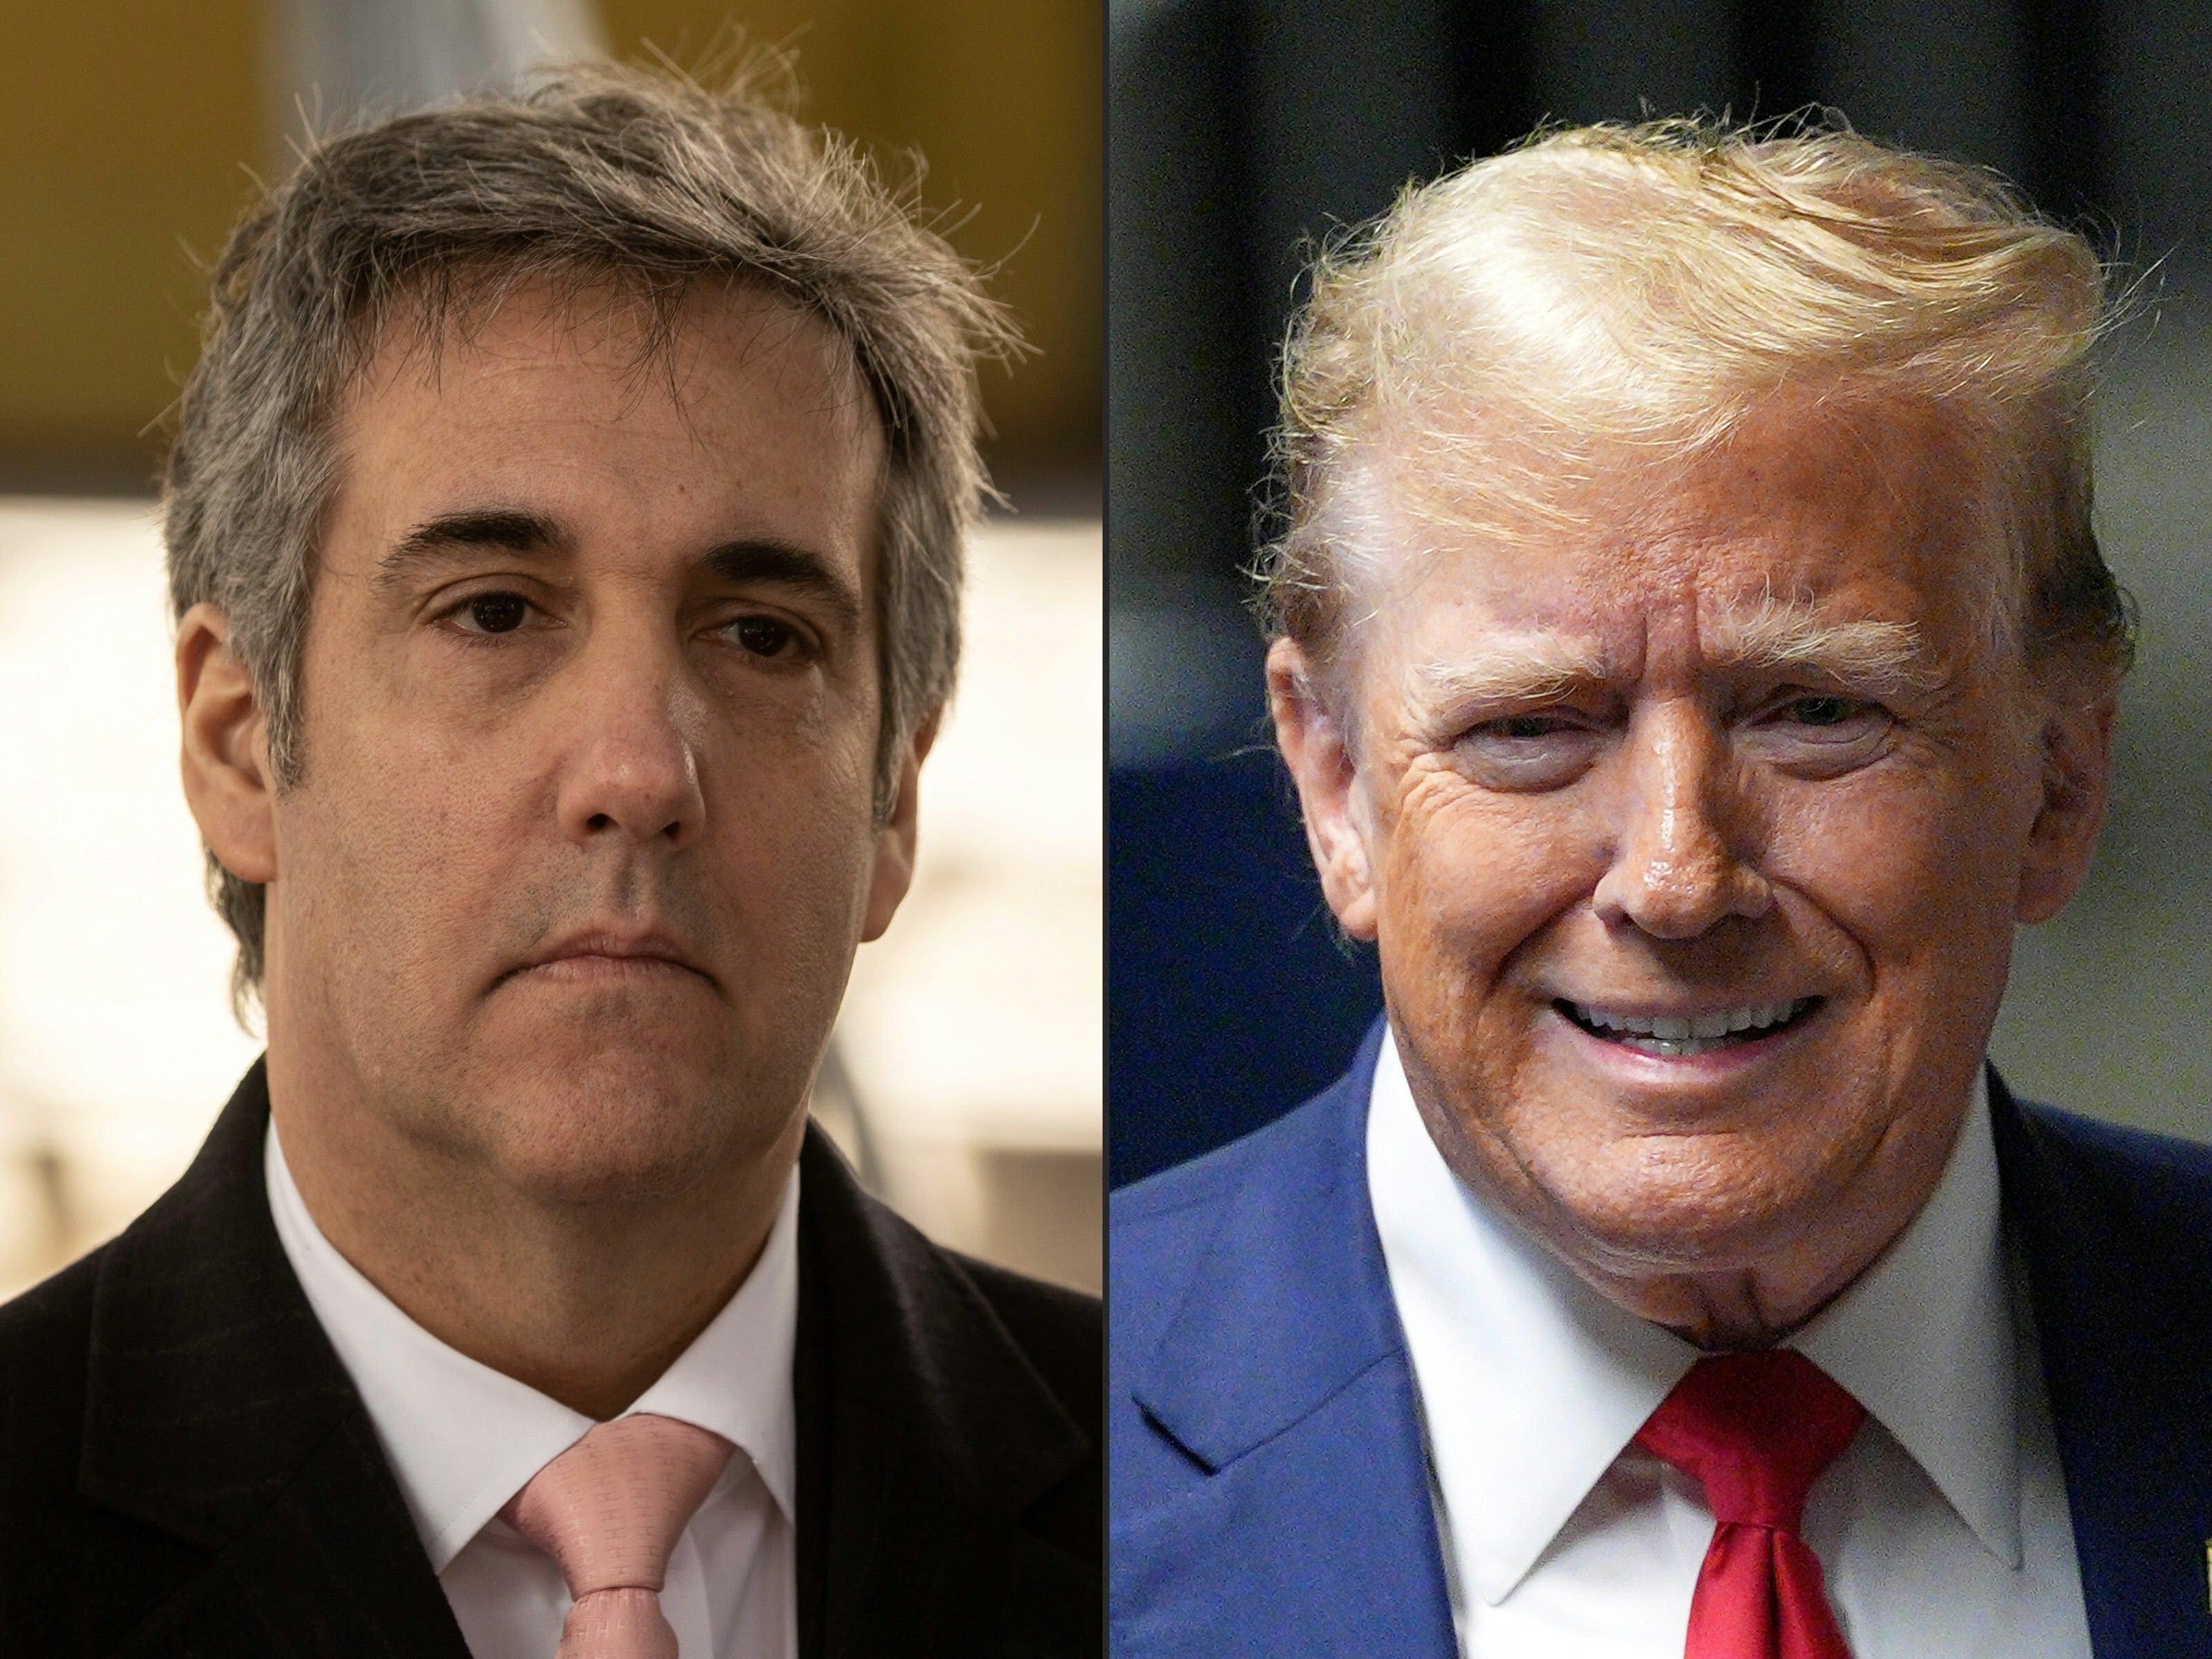 Trump trial live updates: Star witness Michael Cohen returns to stand in hush money case